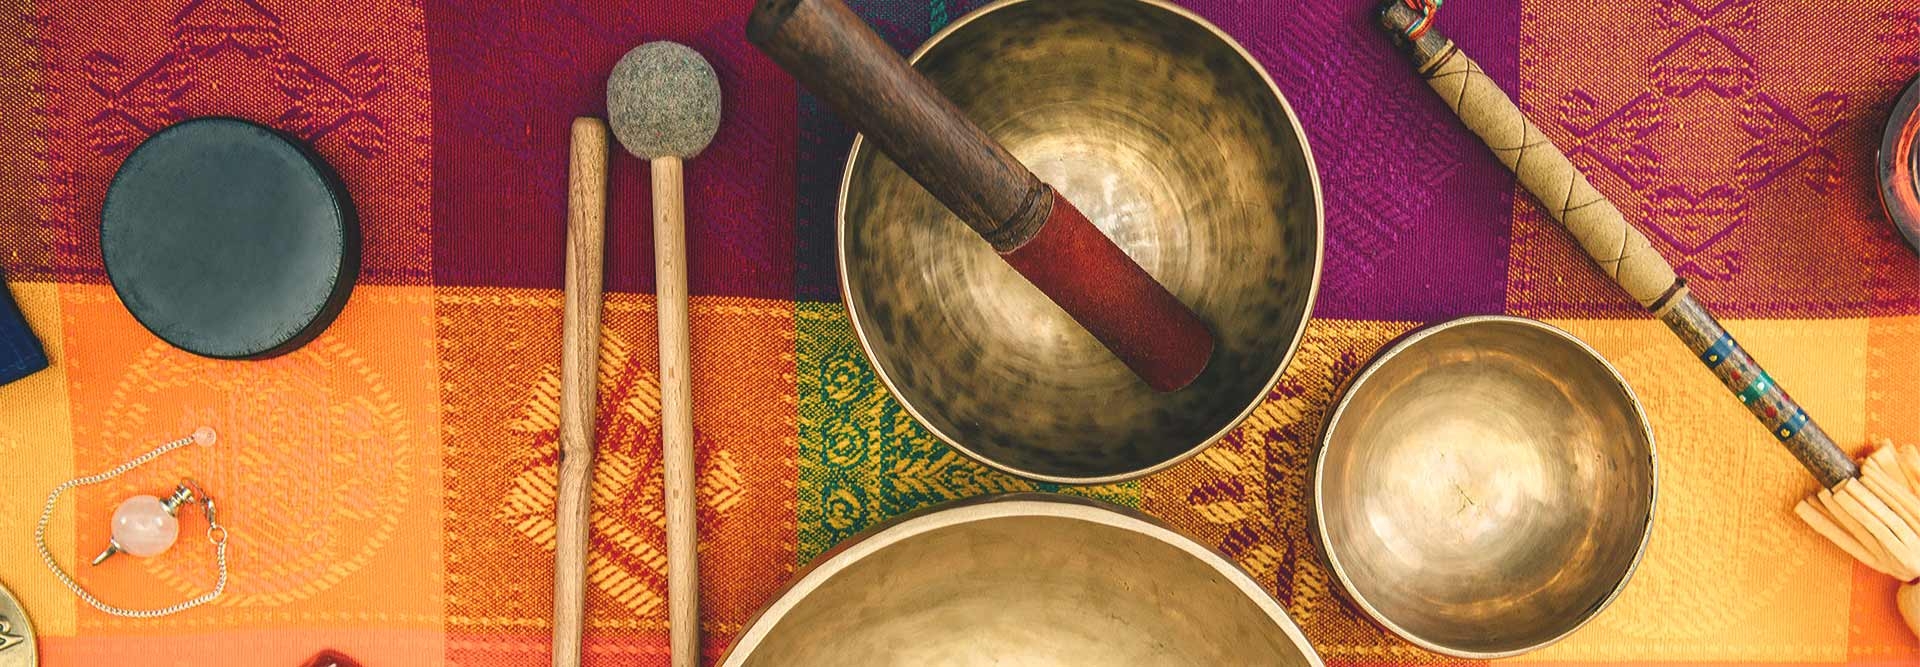 All You Need to Know About Sound Healing